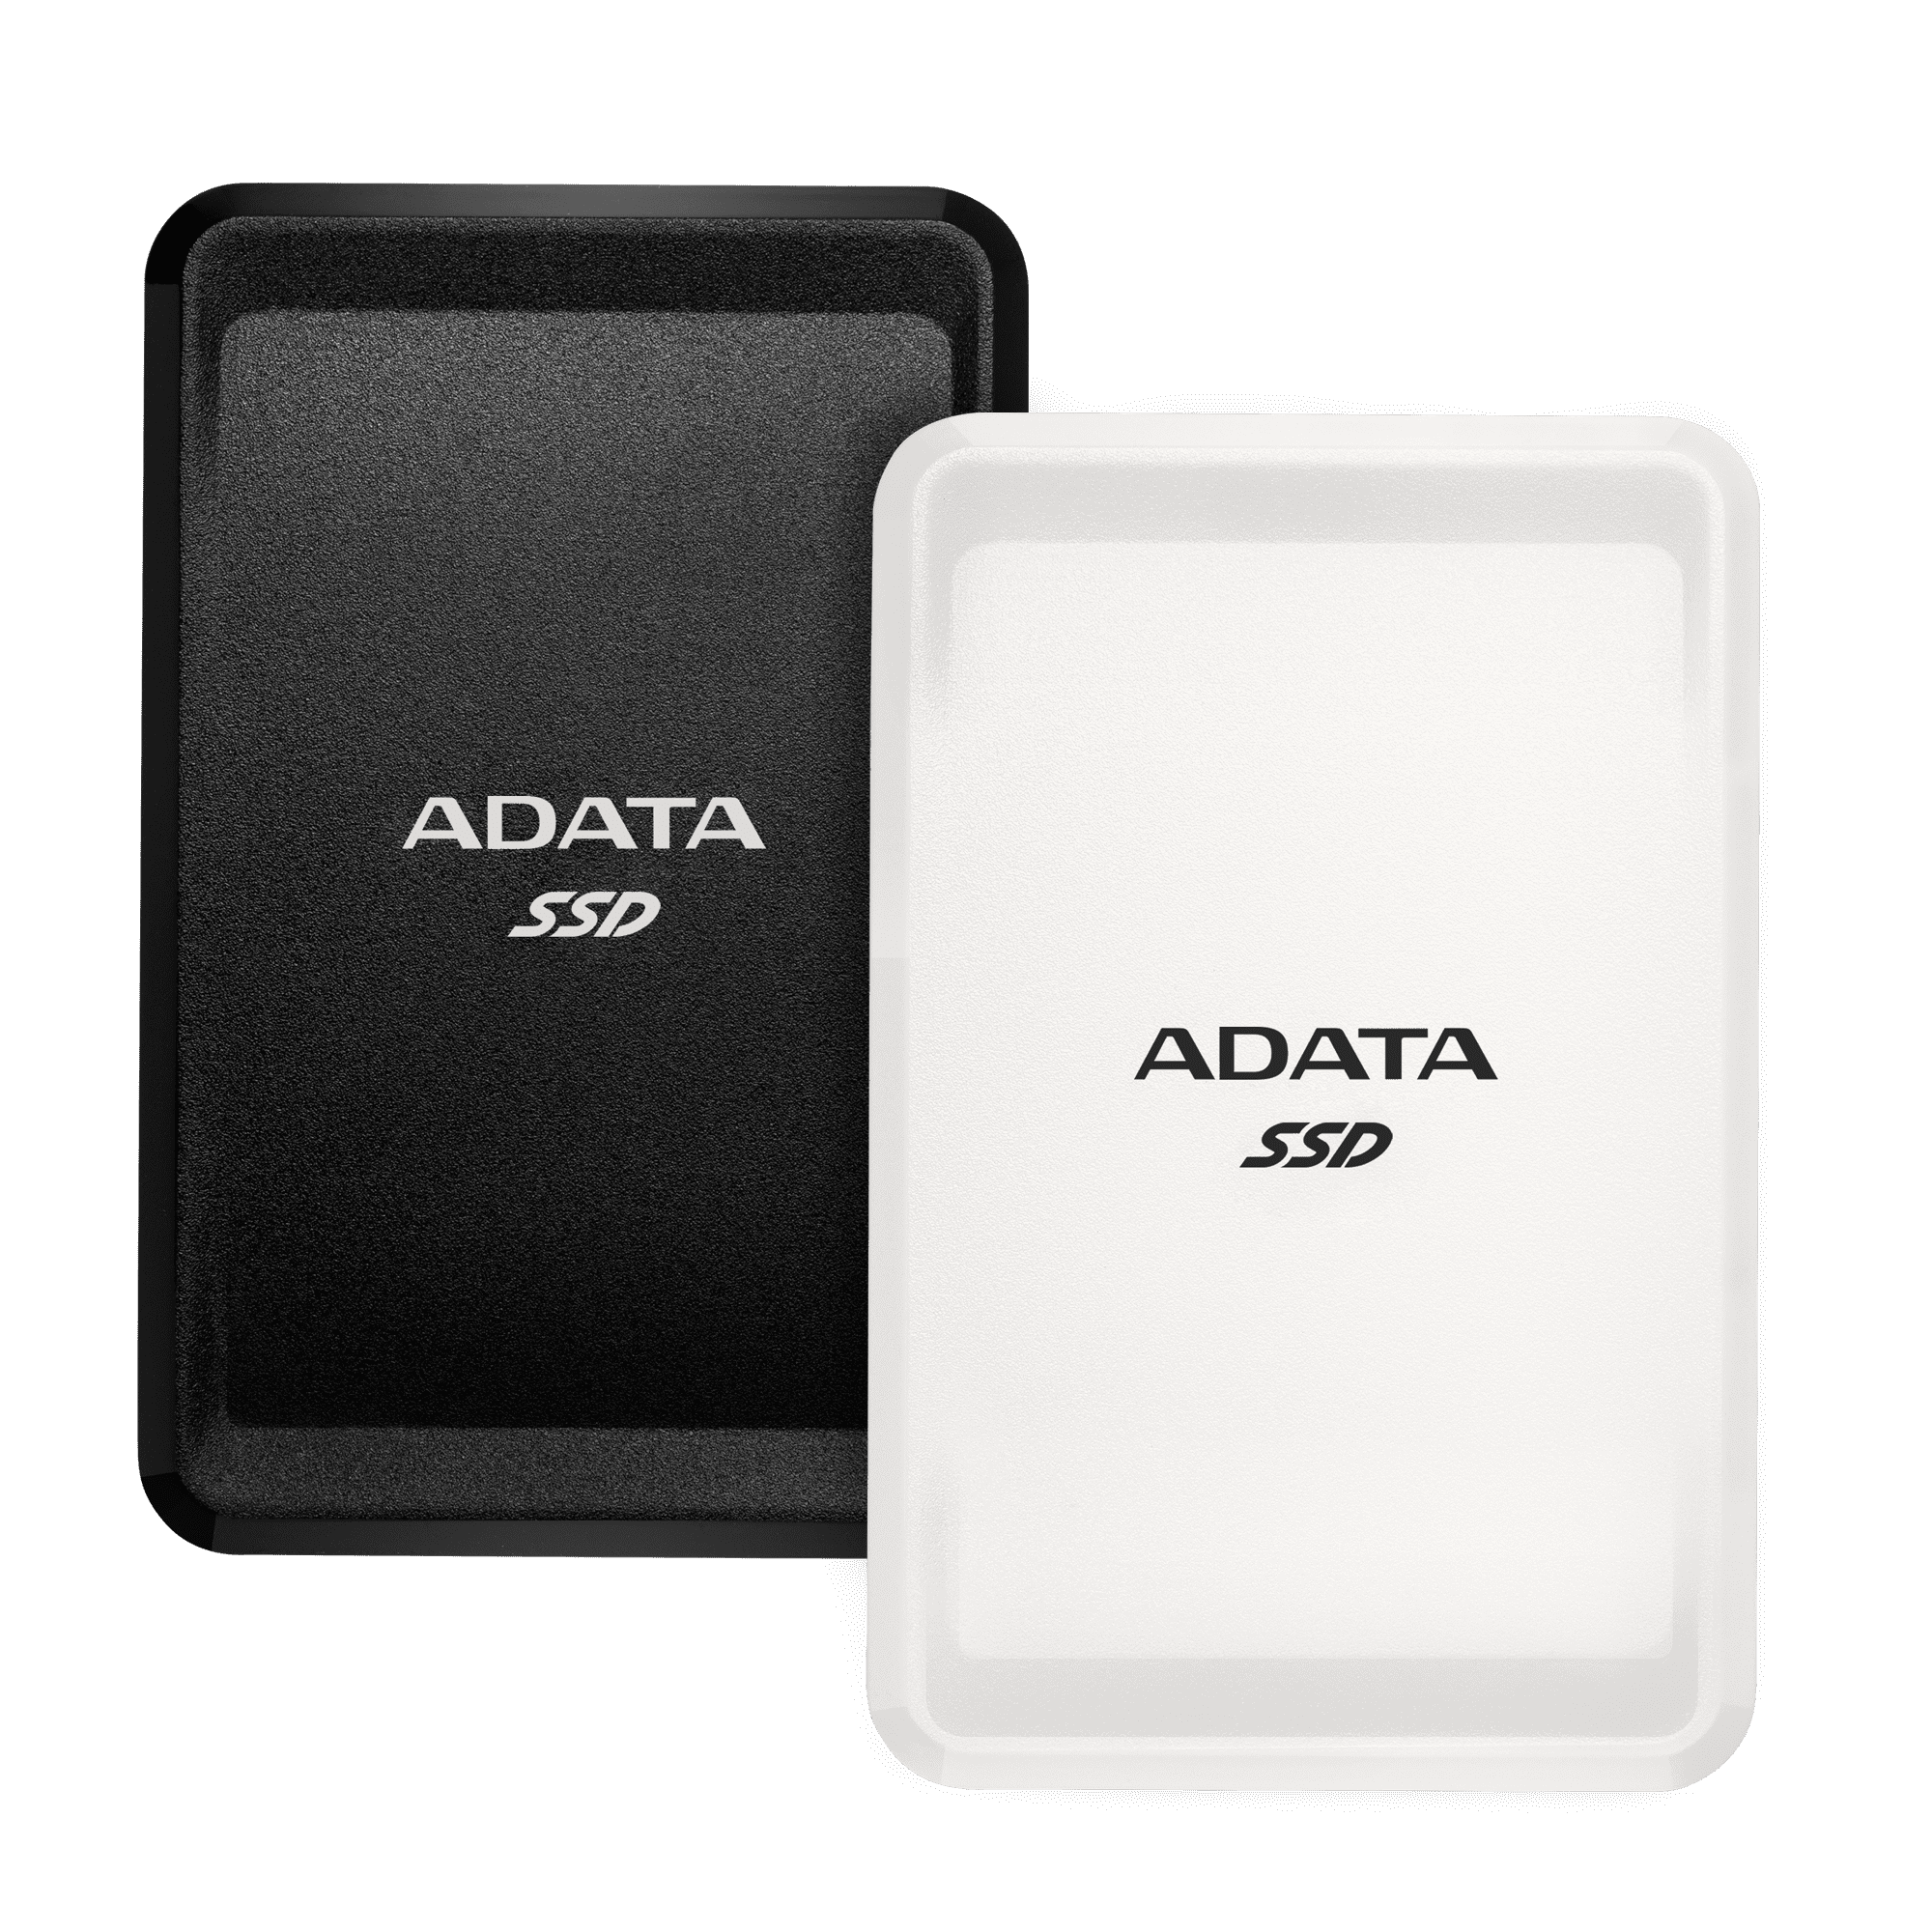 ADATA Launches Slim and Portable SC685 External Solid State Drive